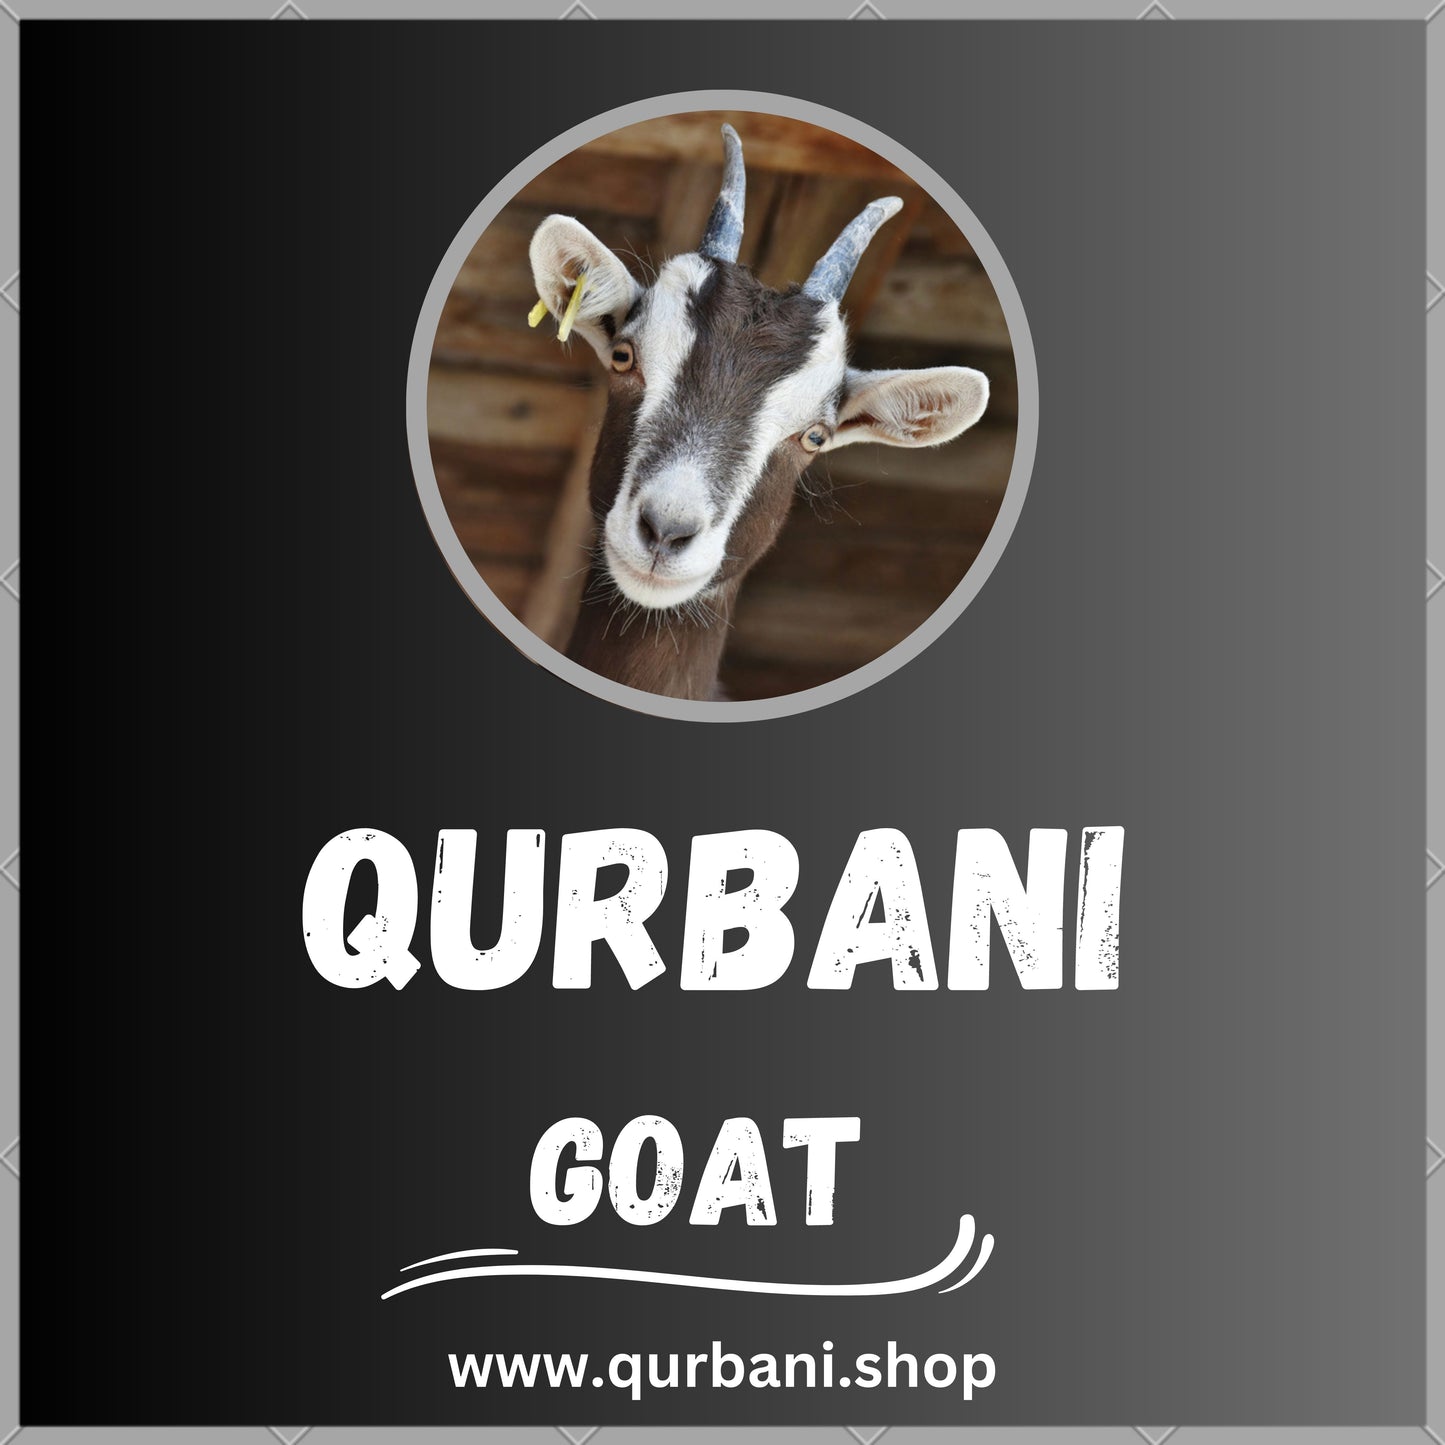 Trusted Qurbani Services in Pittsburgh - Order Your Eid Sacrifice Today!